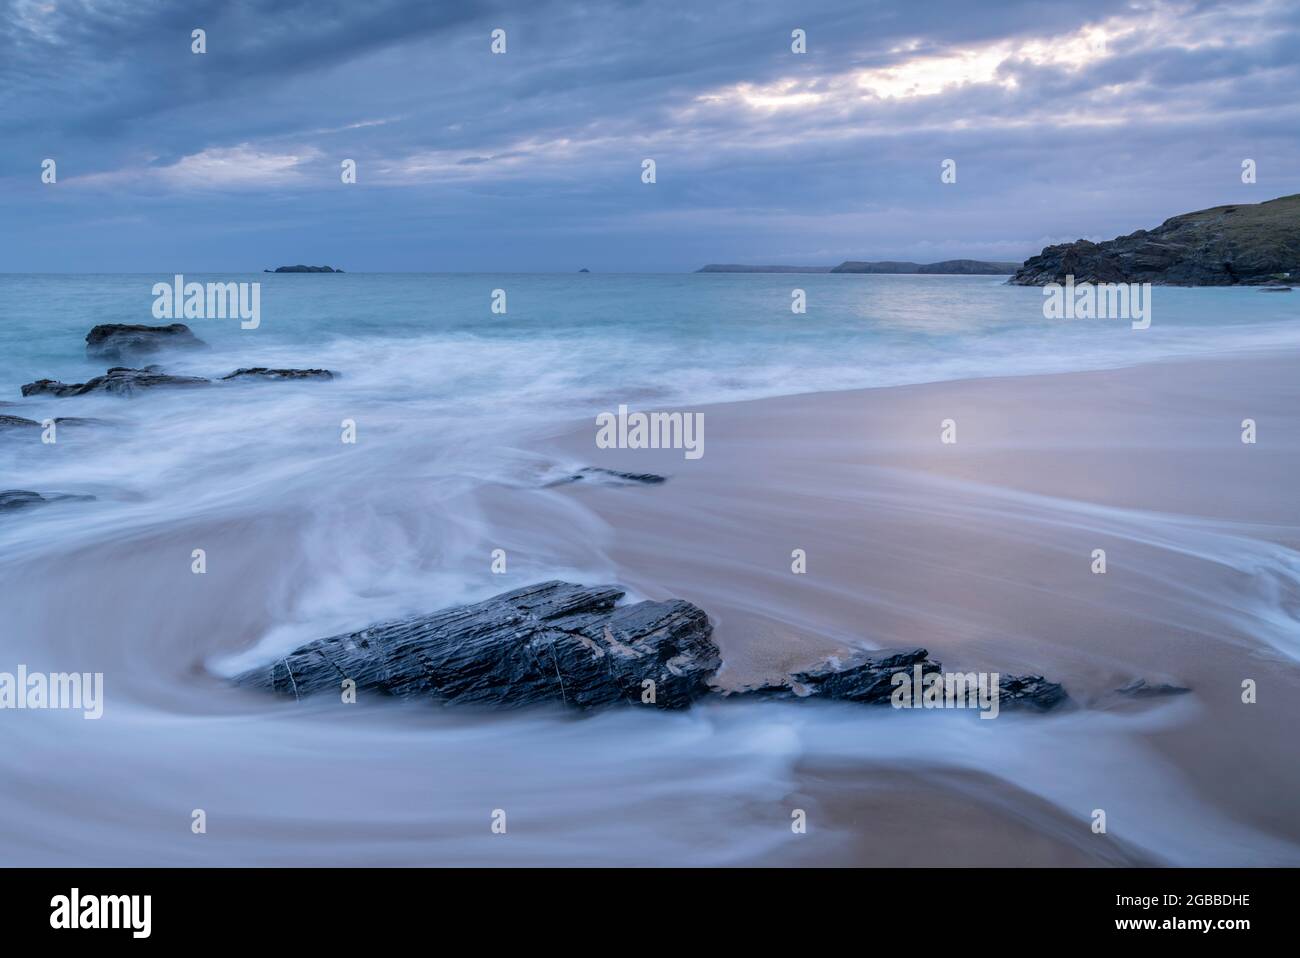 Waves wash over Mother Ivey's Beach at dawn, St. Merryn, Cornwall, England, United Kingdom, Europe Stock Photo